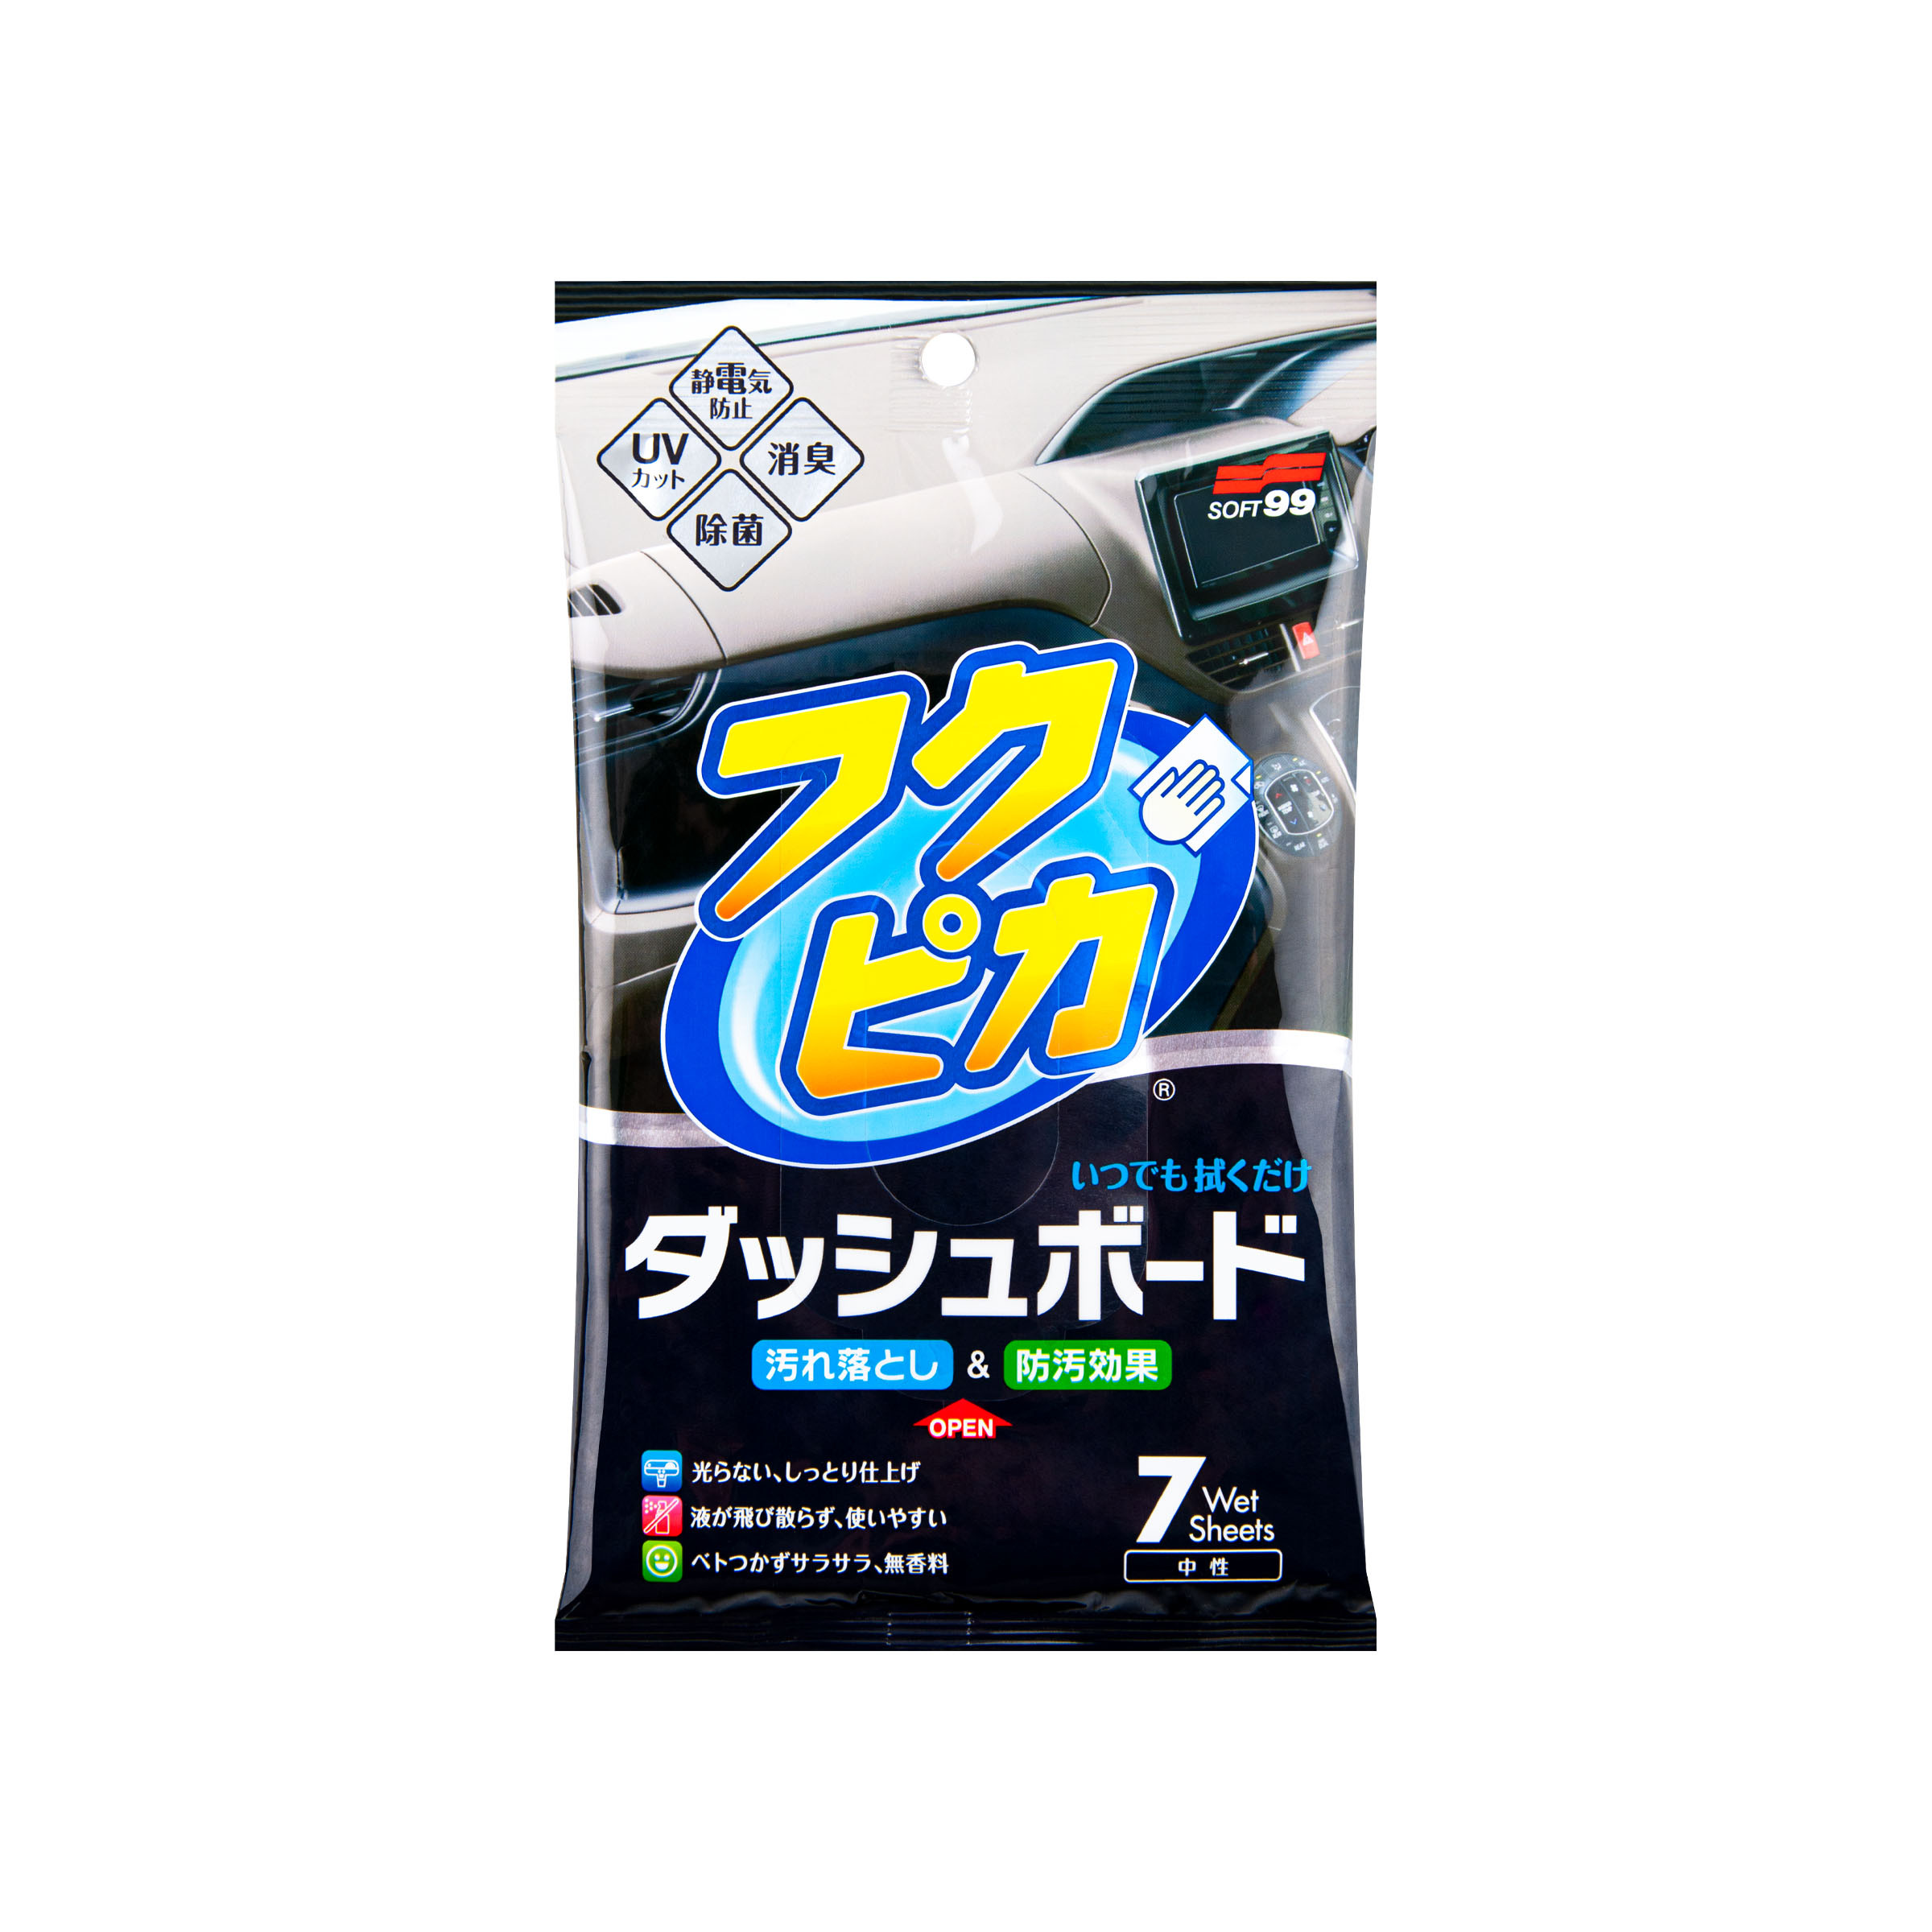 Fukupika Dashboard Cleaning Wipes, interior cleaning wipes, 7 pcs.